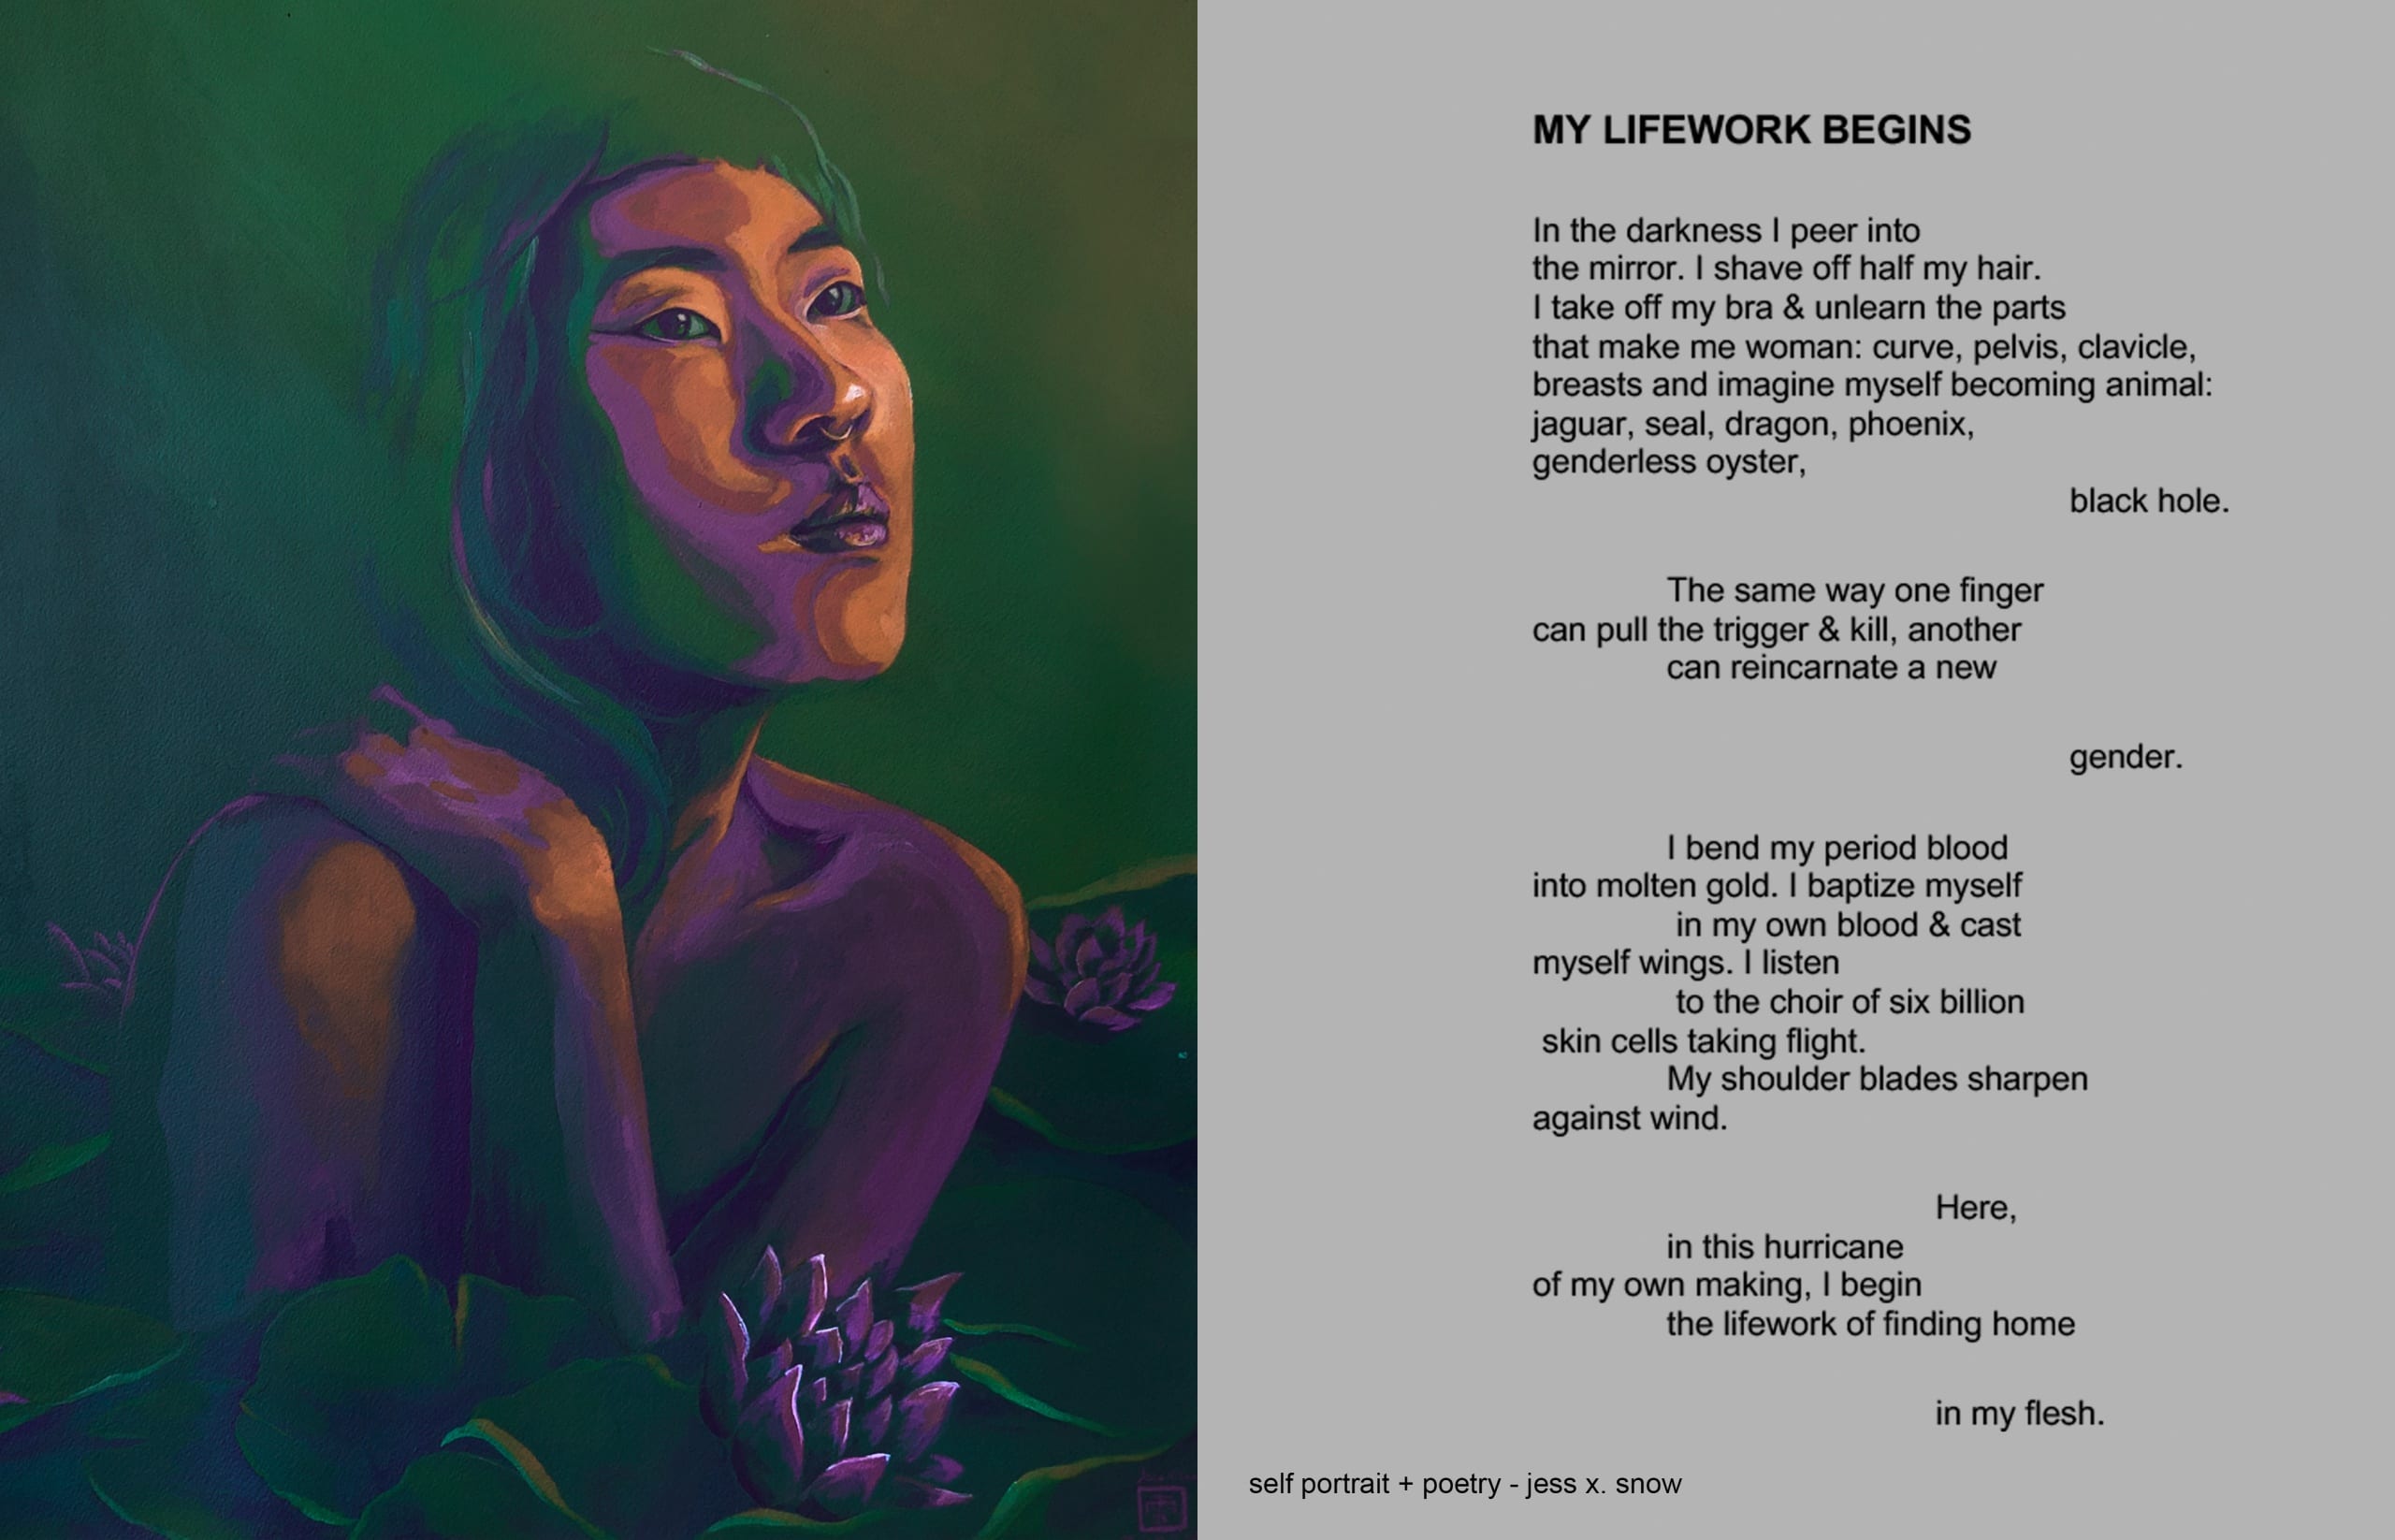 To left, painted self-portrait of the artist with green background and the figure’s body is cast in purple light; their left arm rests on their right shoulder, while the figure looks up out of the image’s top right corner. Lotus flowers and leaves anchor the bottom quarter of the painting and encircle the figure; a poem appears on the right side against a gray background